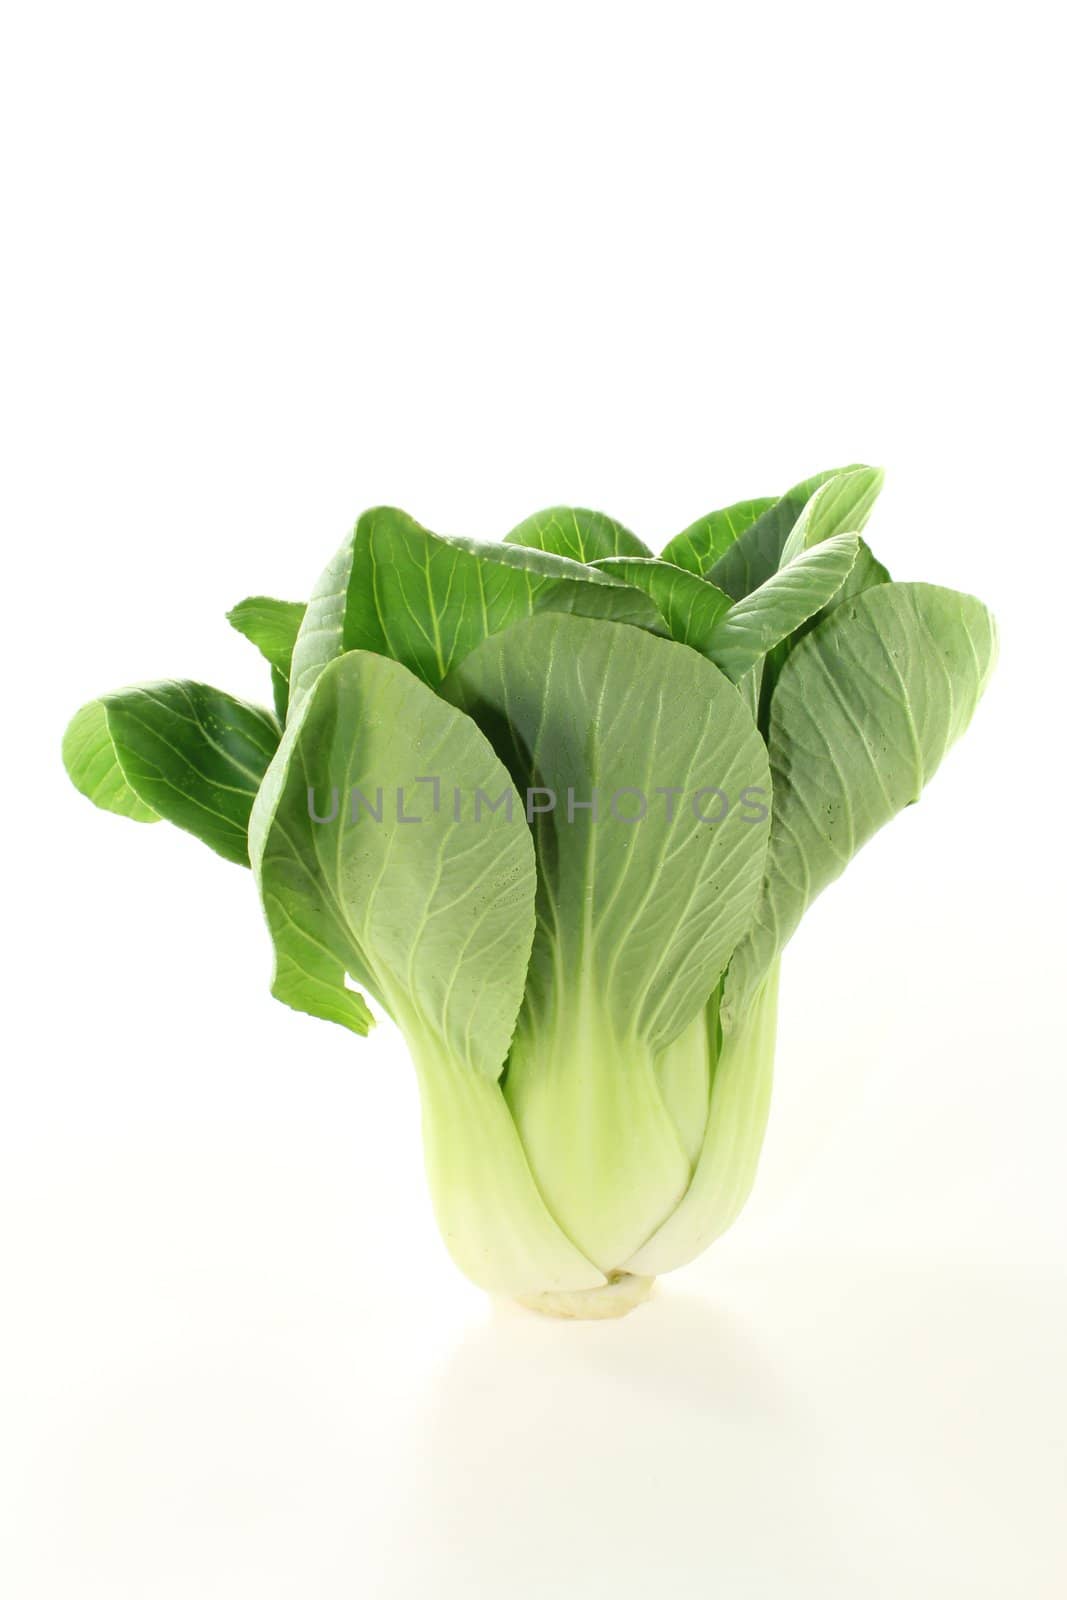 pak choi by discovery